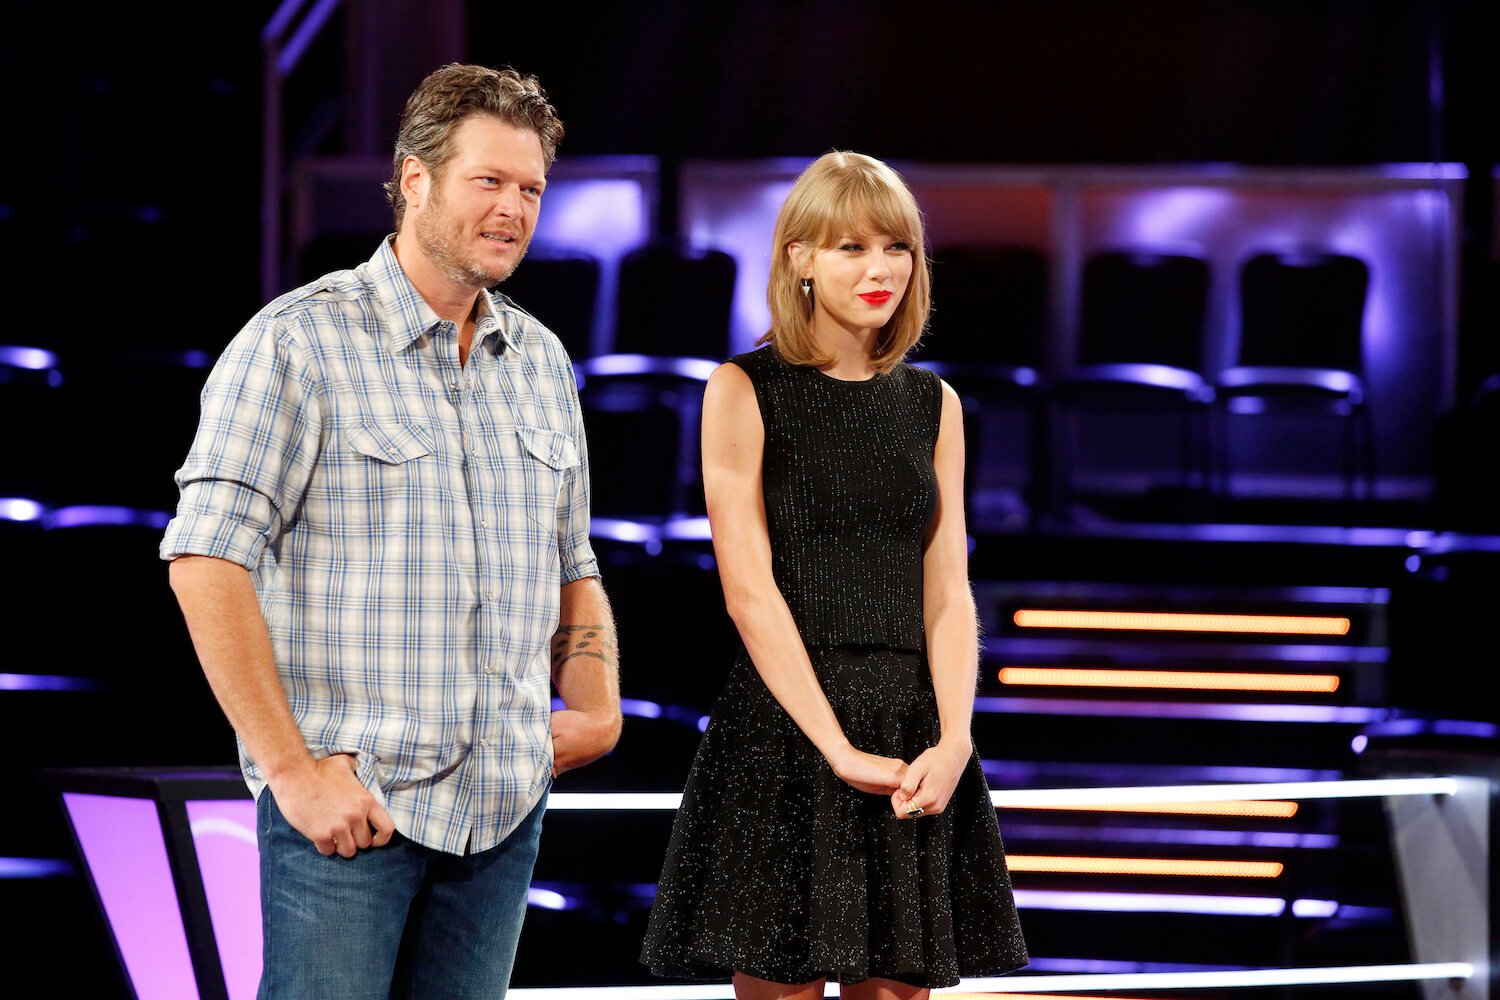 Blake Shelton and Taylor Swift on the set of 'The Voice'